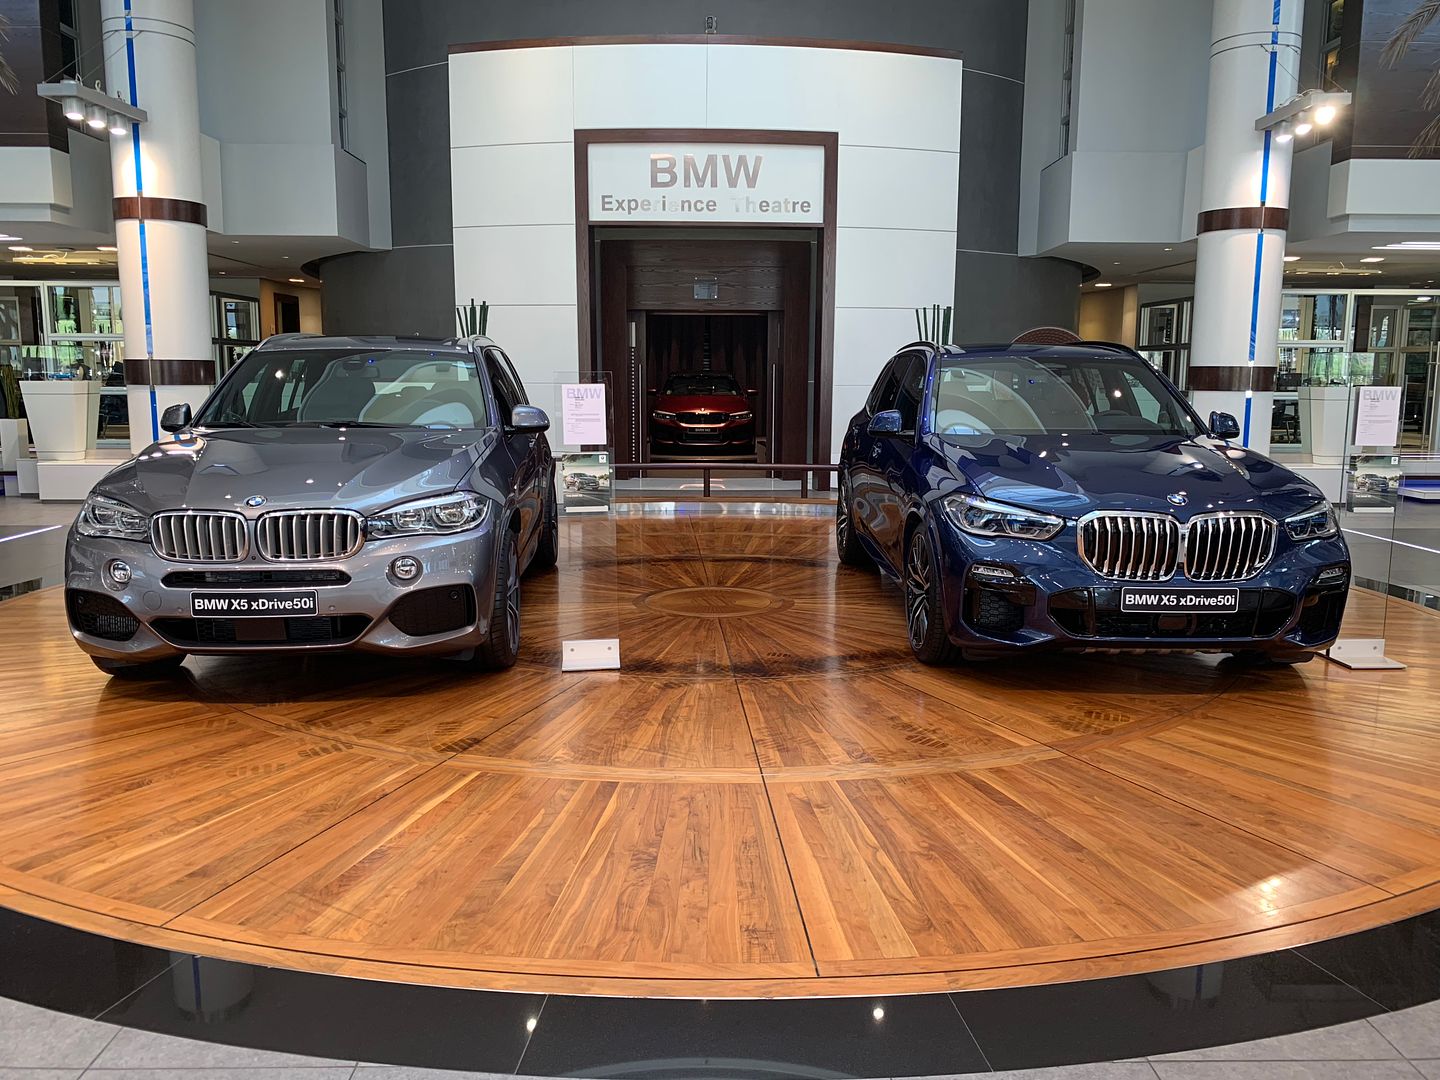 Pics and observations: 2019 X5 (G05) and 2018 X5 (F15) - BMW X5